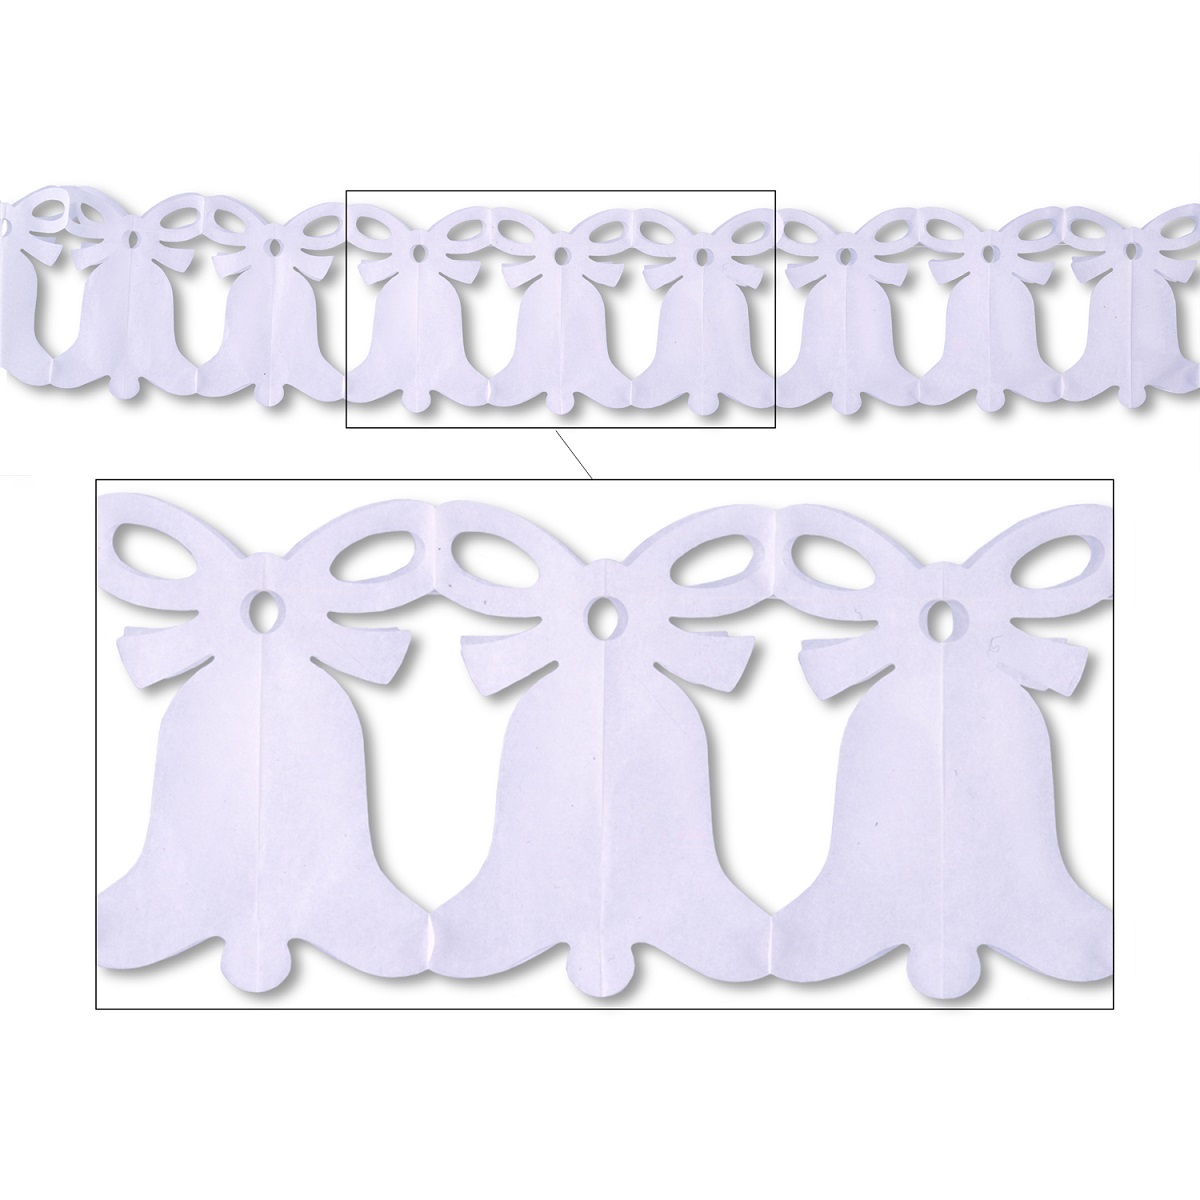 Beistle Club Pack of 12 Annivesary Themed White Westminster Bell Garland Party Decorations 12'